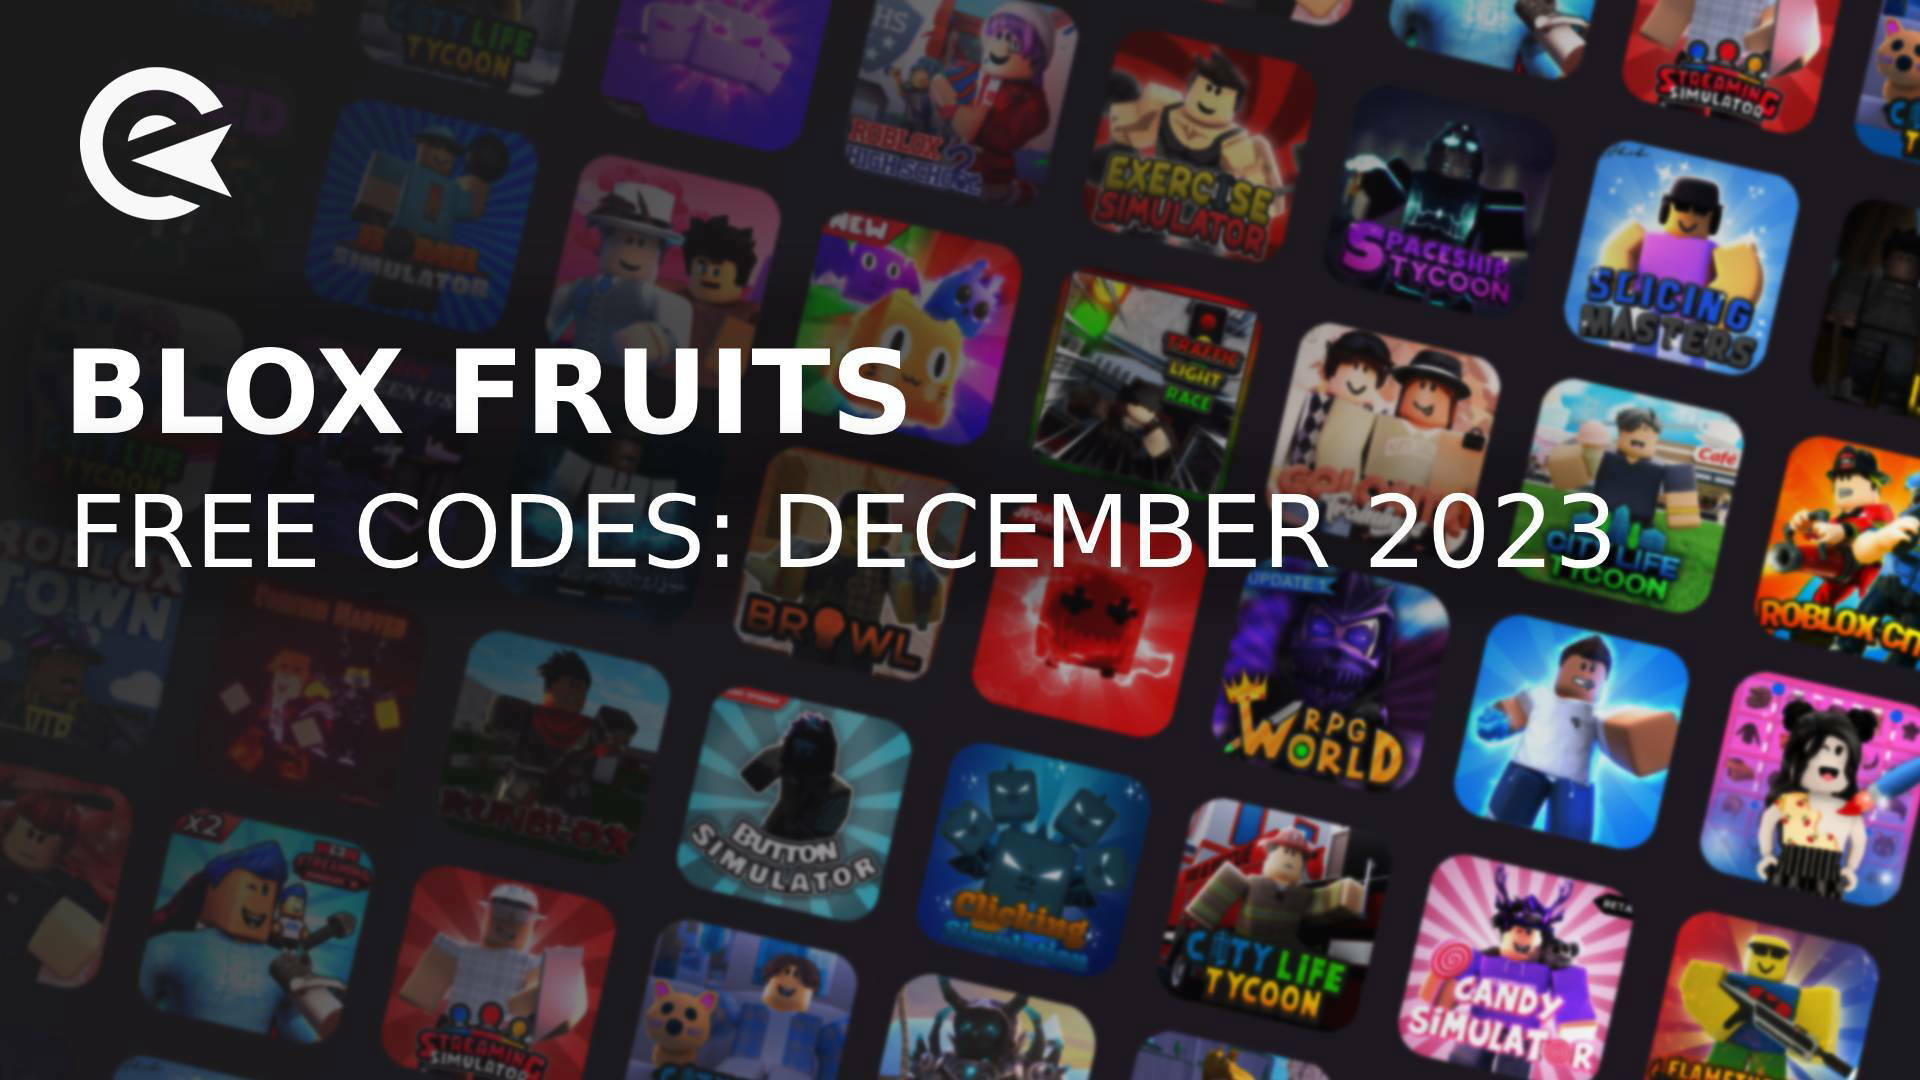 Blox Fruits codes for December 2023